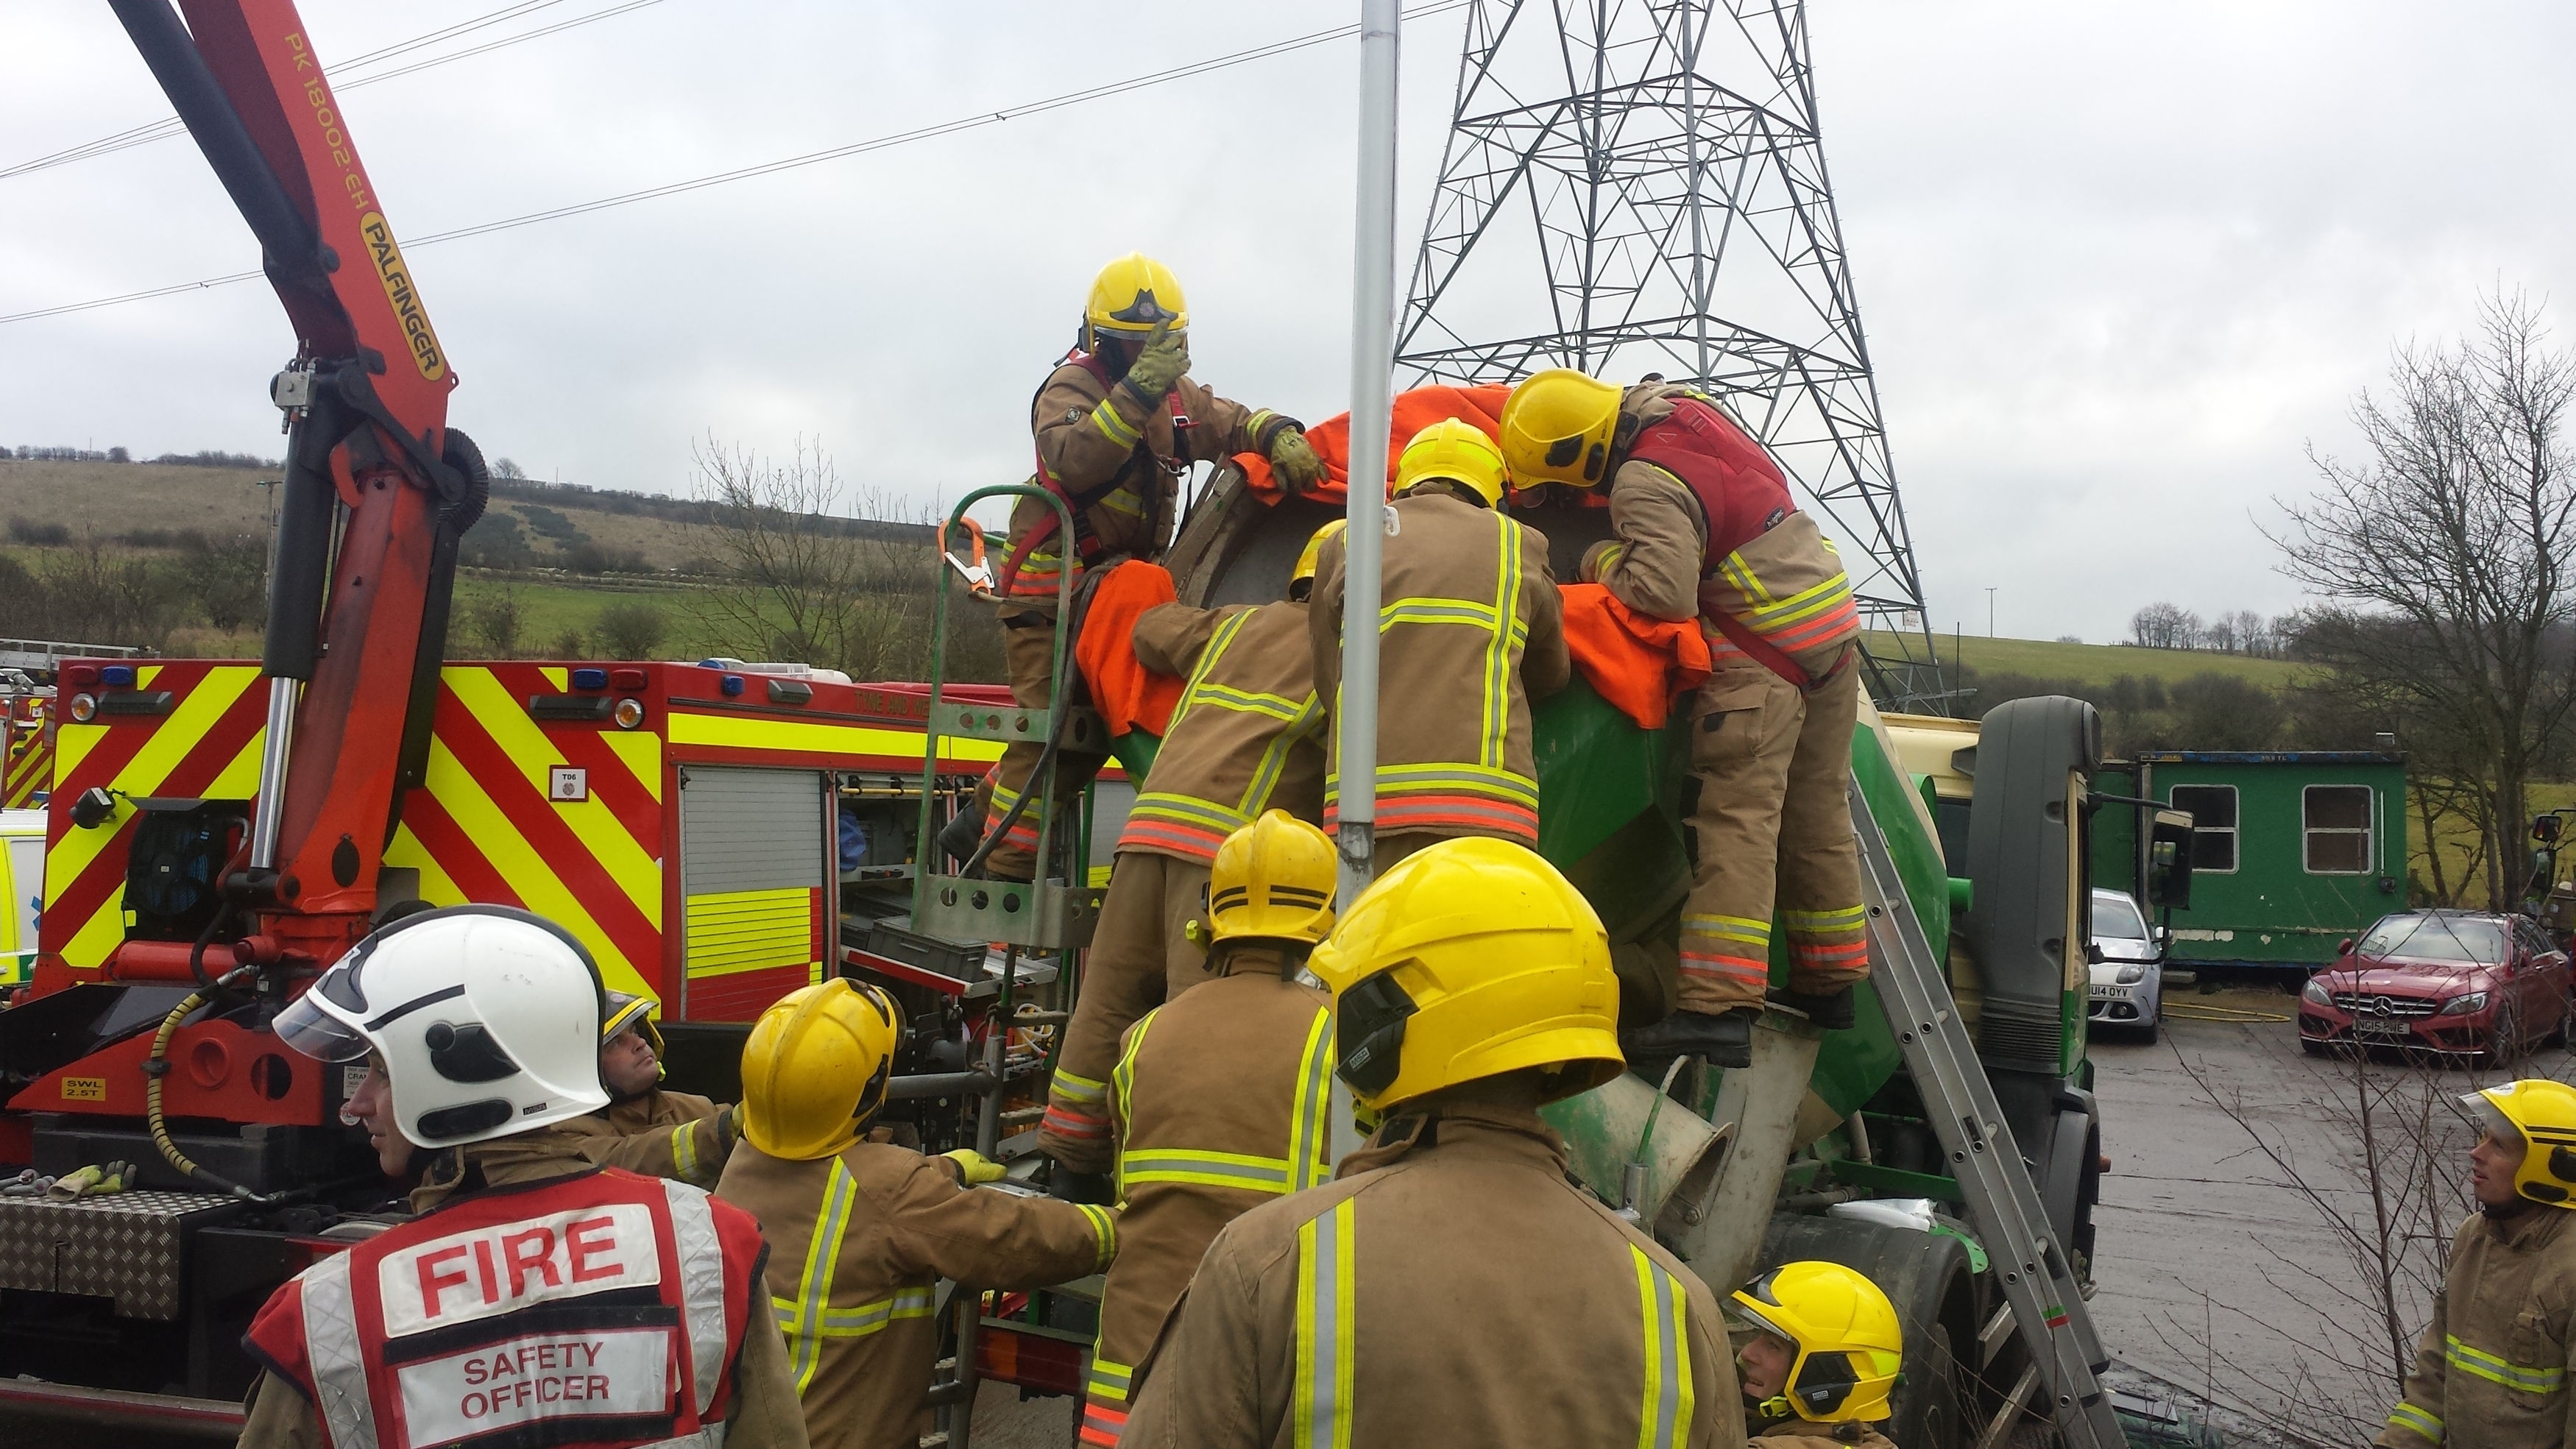 Photos released by the County Durham and Darlington Fire and Rescue Service showed rescuers working on the vehicle, including the use of cutting equipment on the mixing drum.